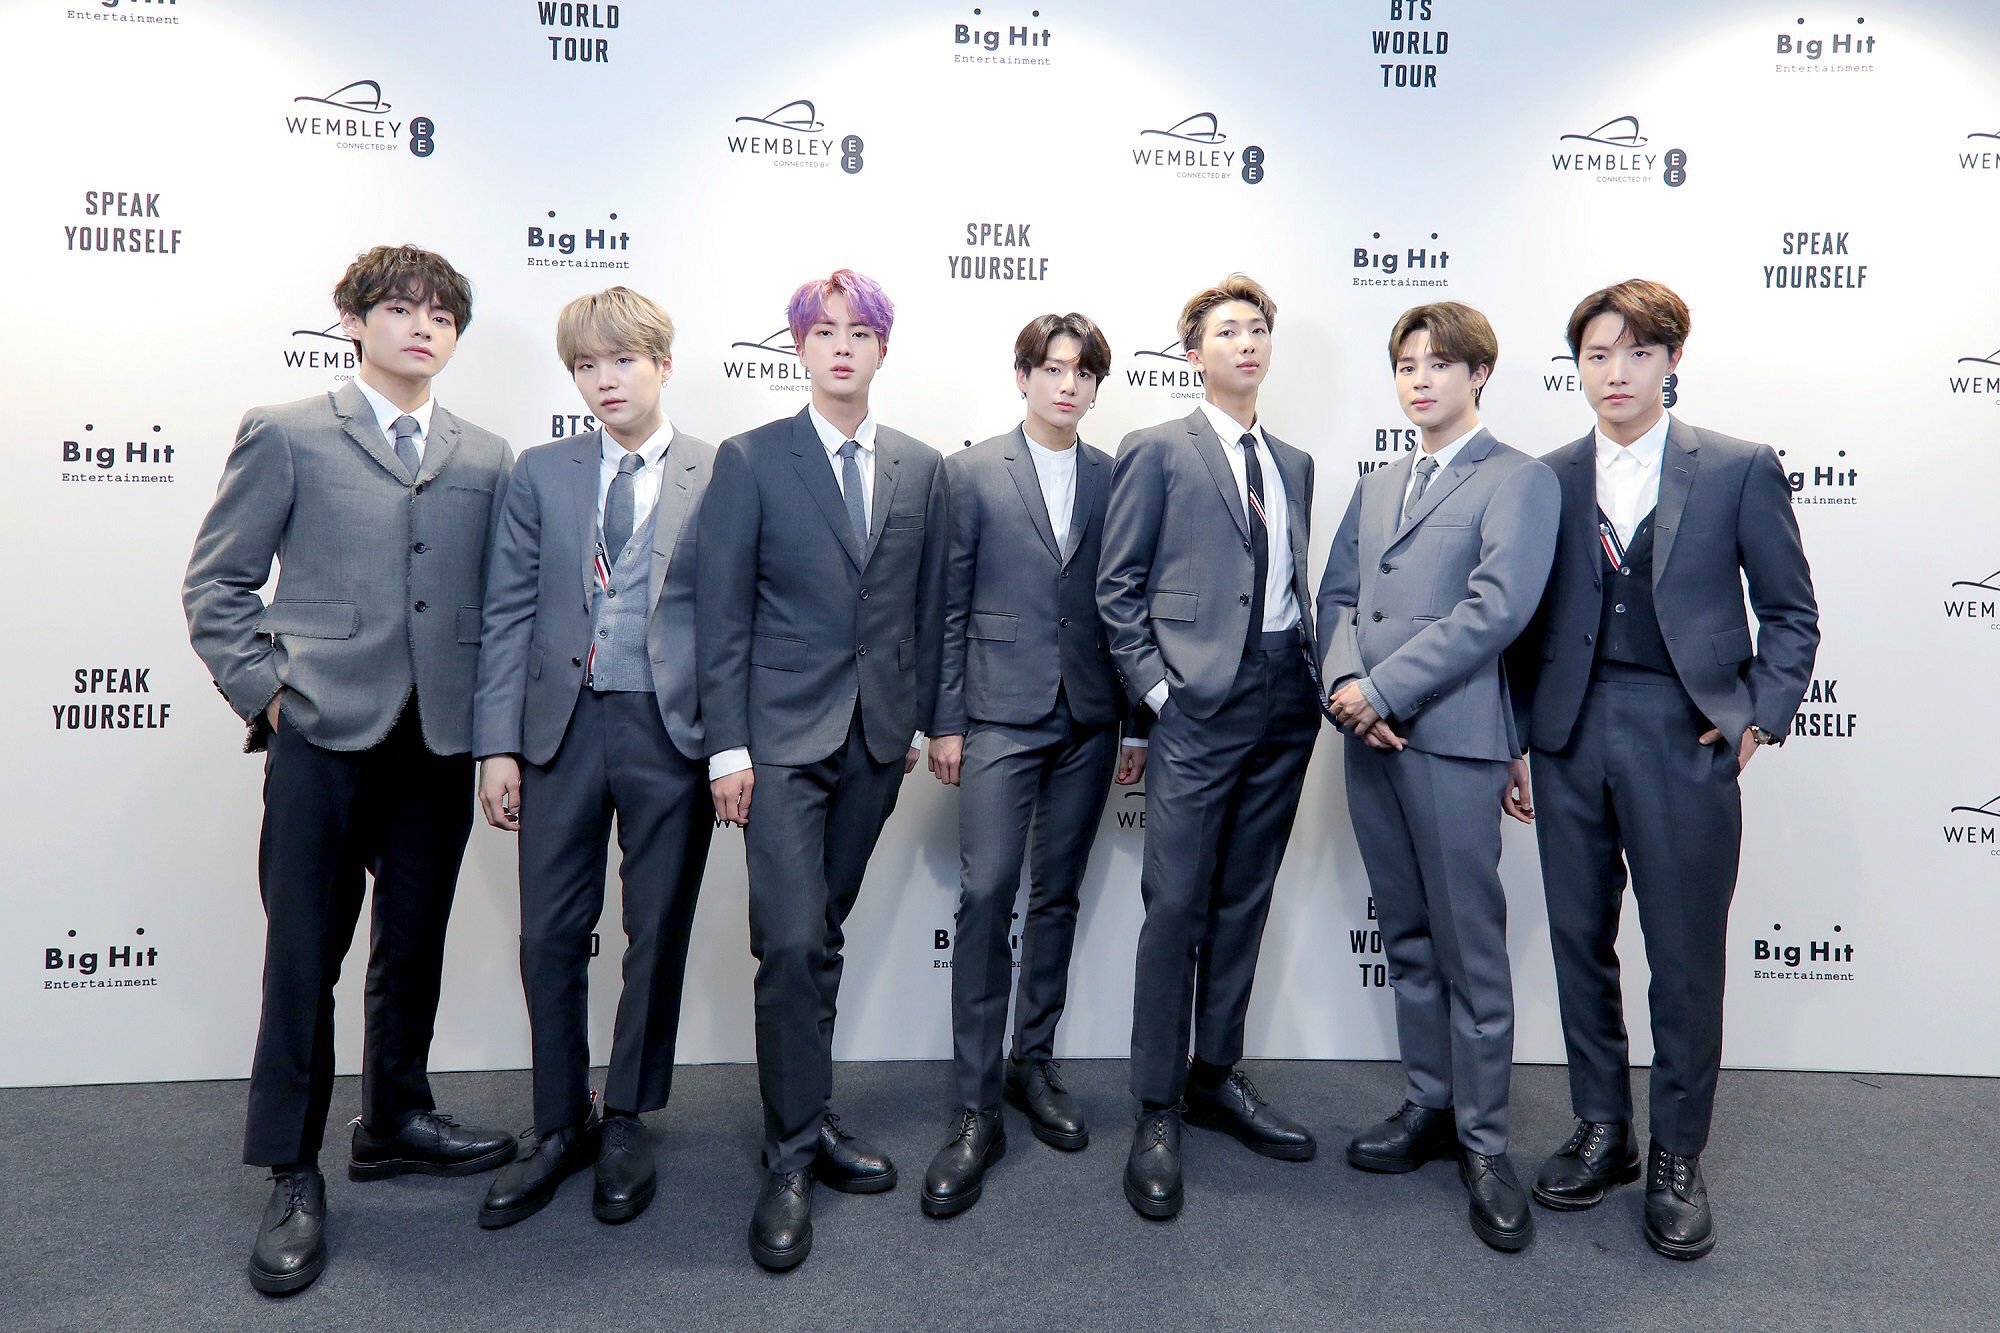 Picture Media Bts World Tour Love Yourself Speak Yourself In Wembley Stadium London Press Conference 190602